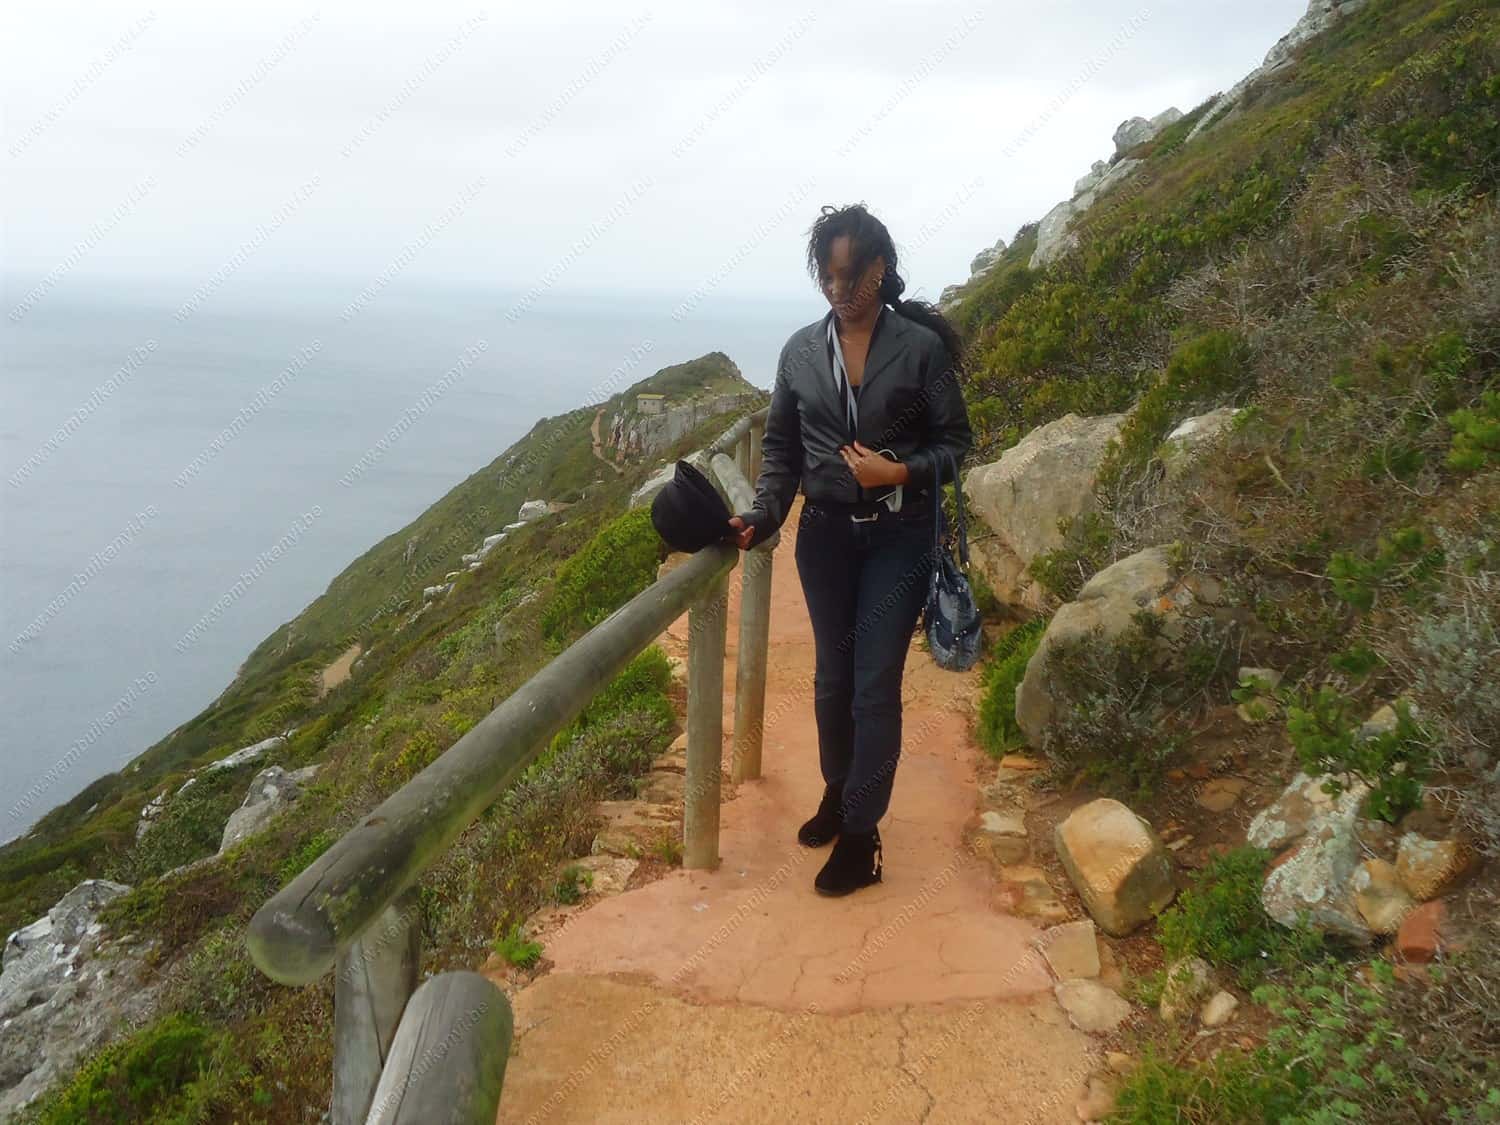 A road Trip to Cape Point